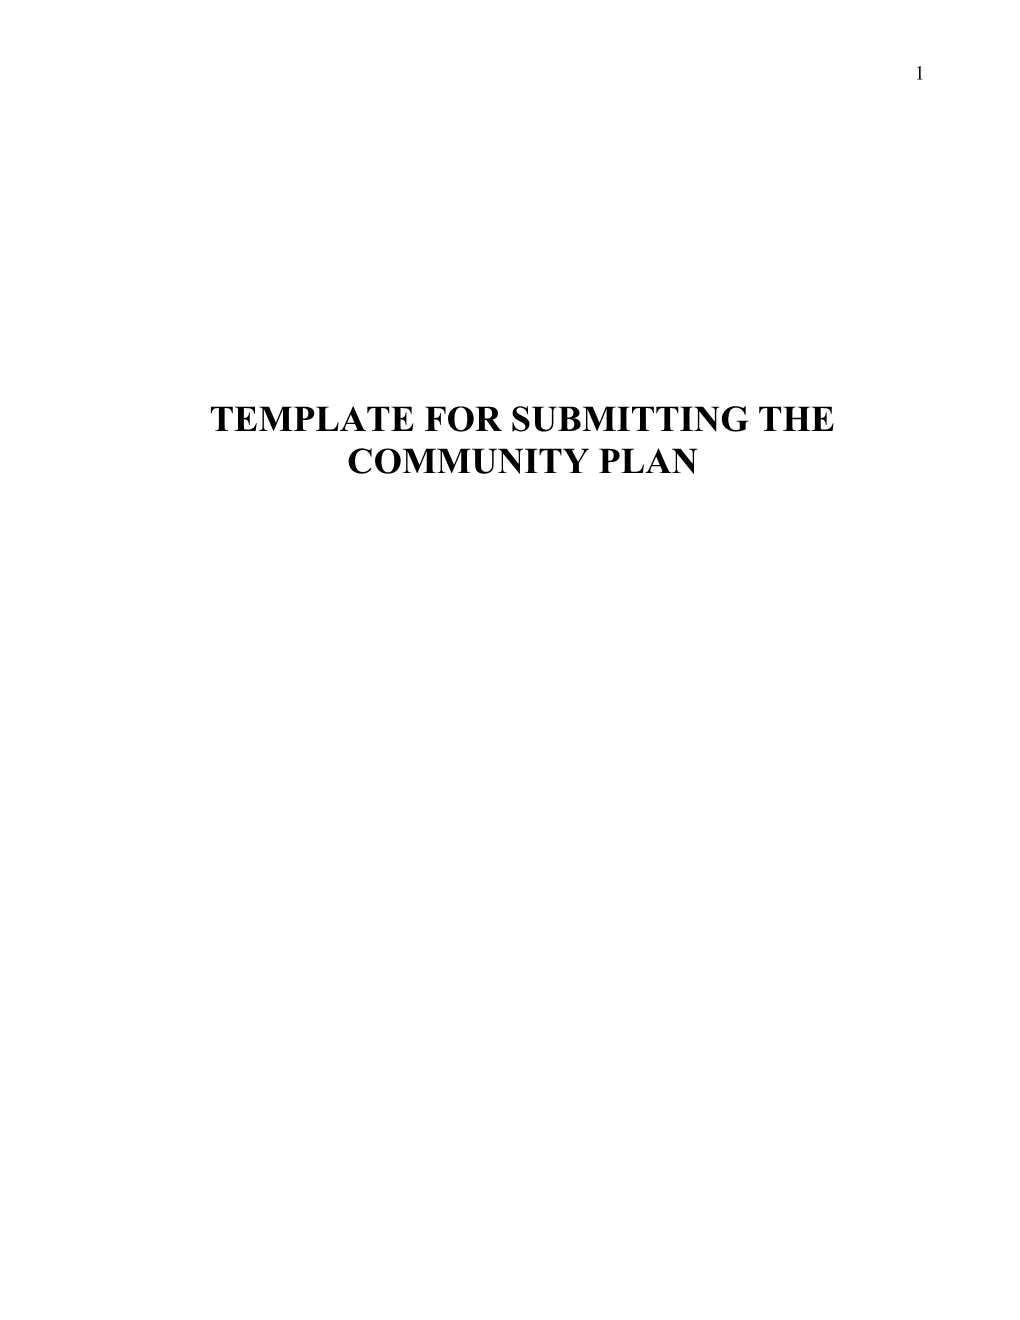 Template for Submitting the Community Plan